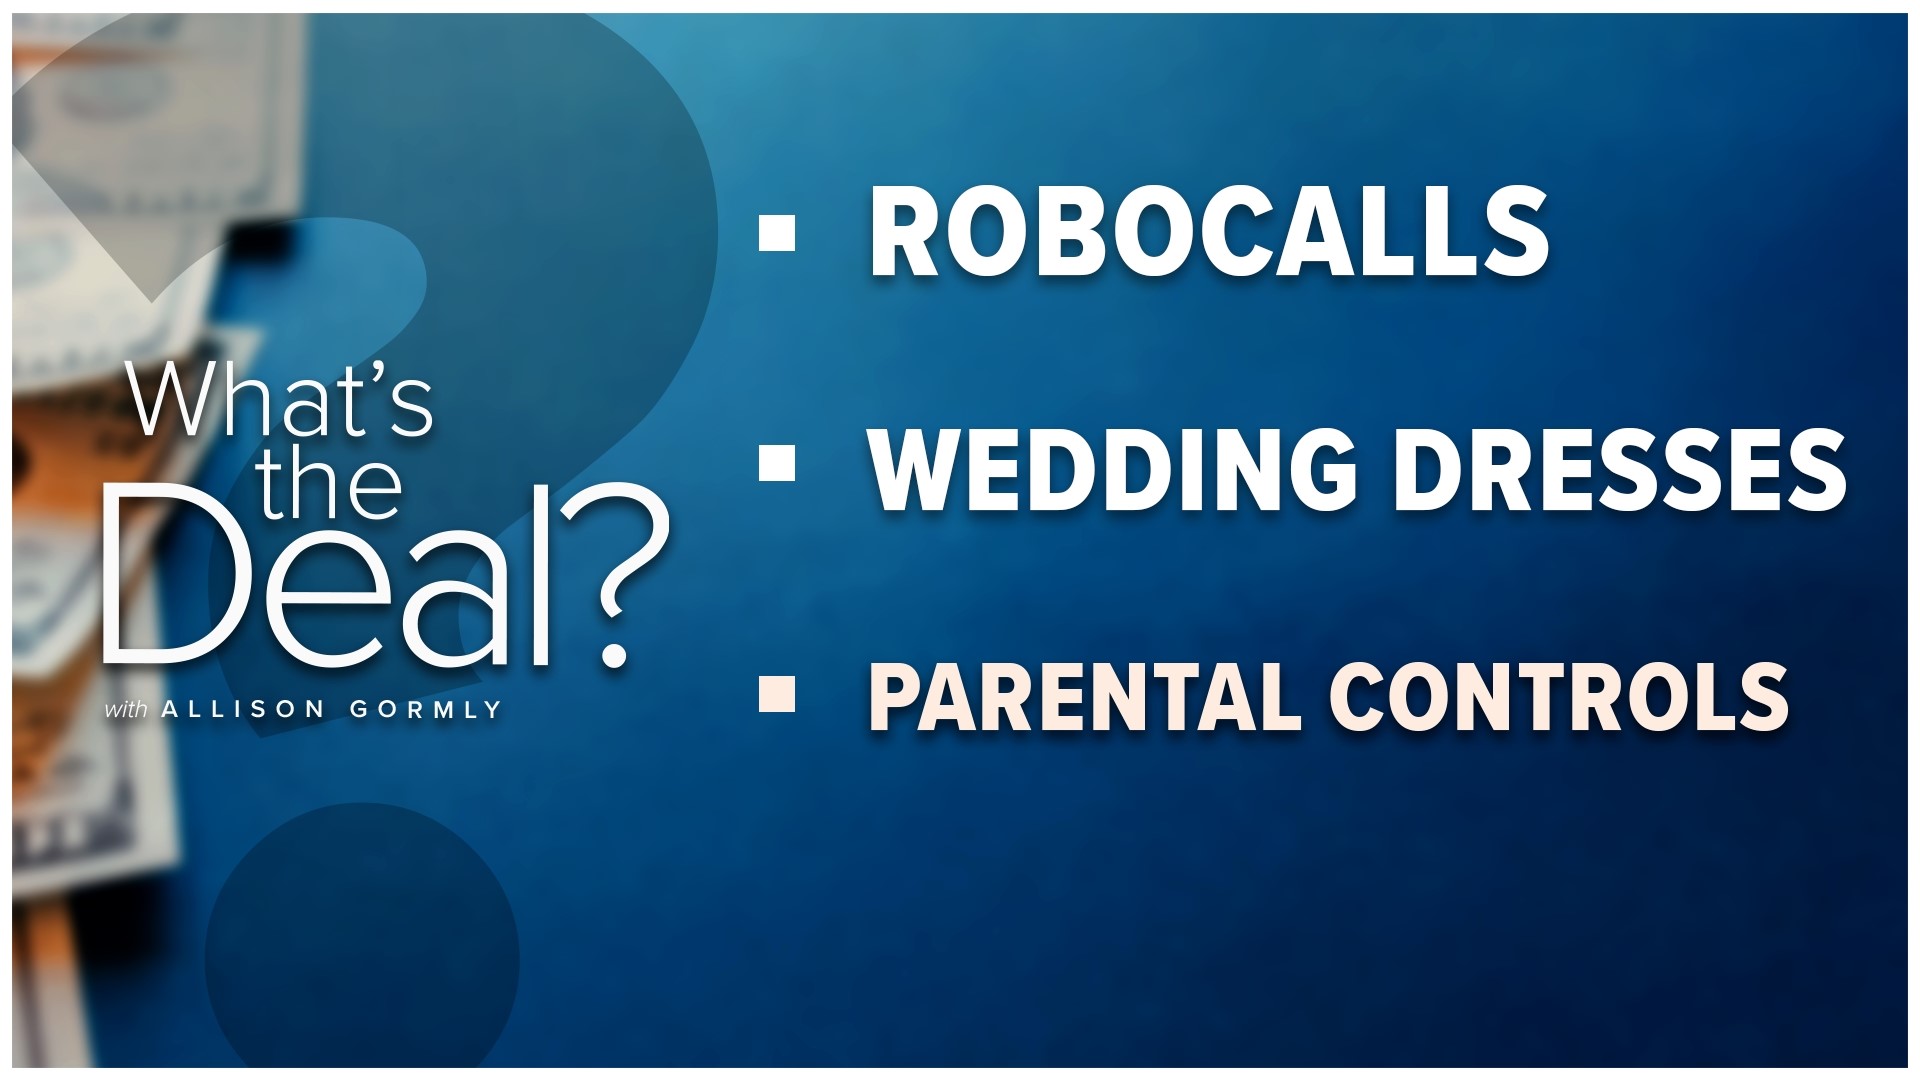 What's the Deal with robocalls? Here's why you may not want to ignore them.